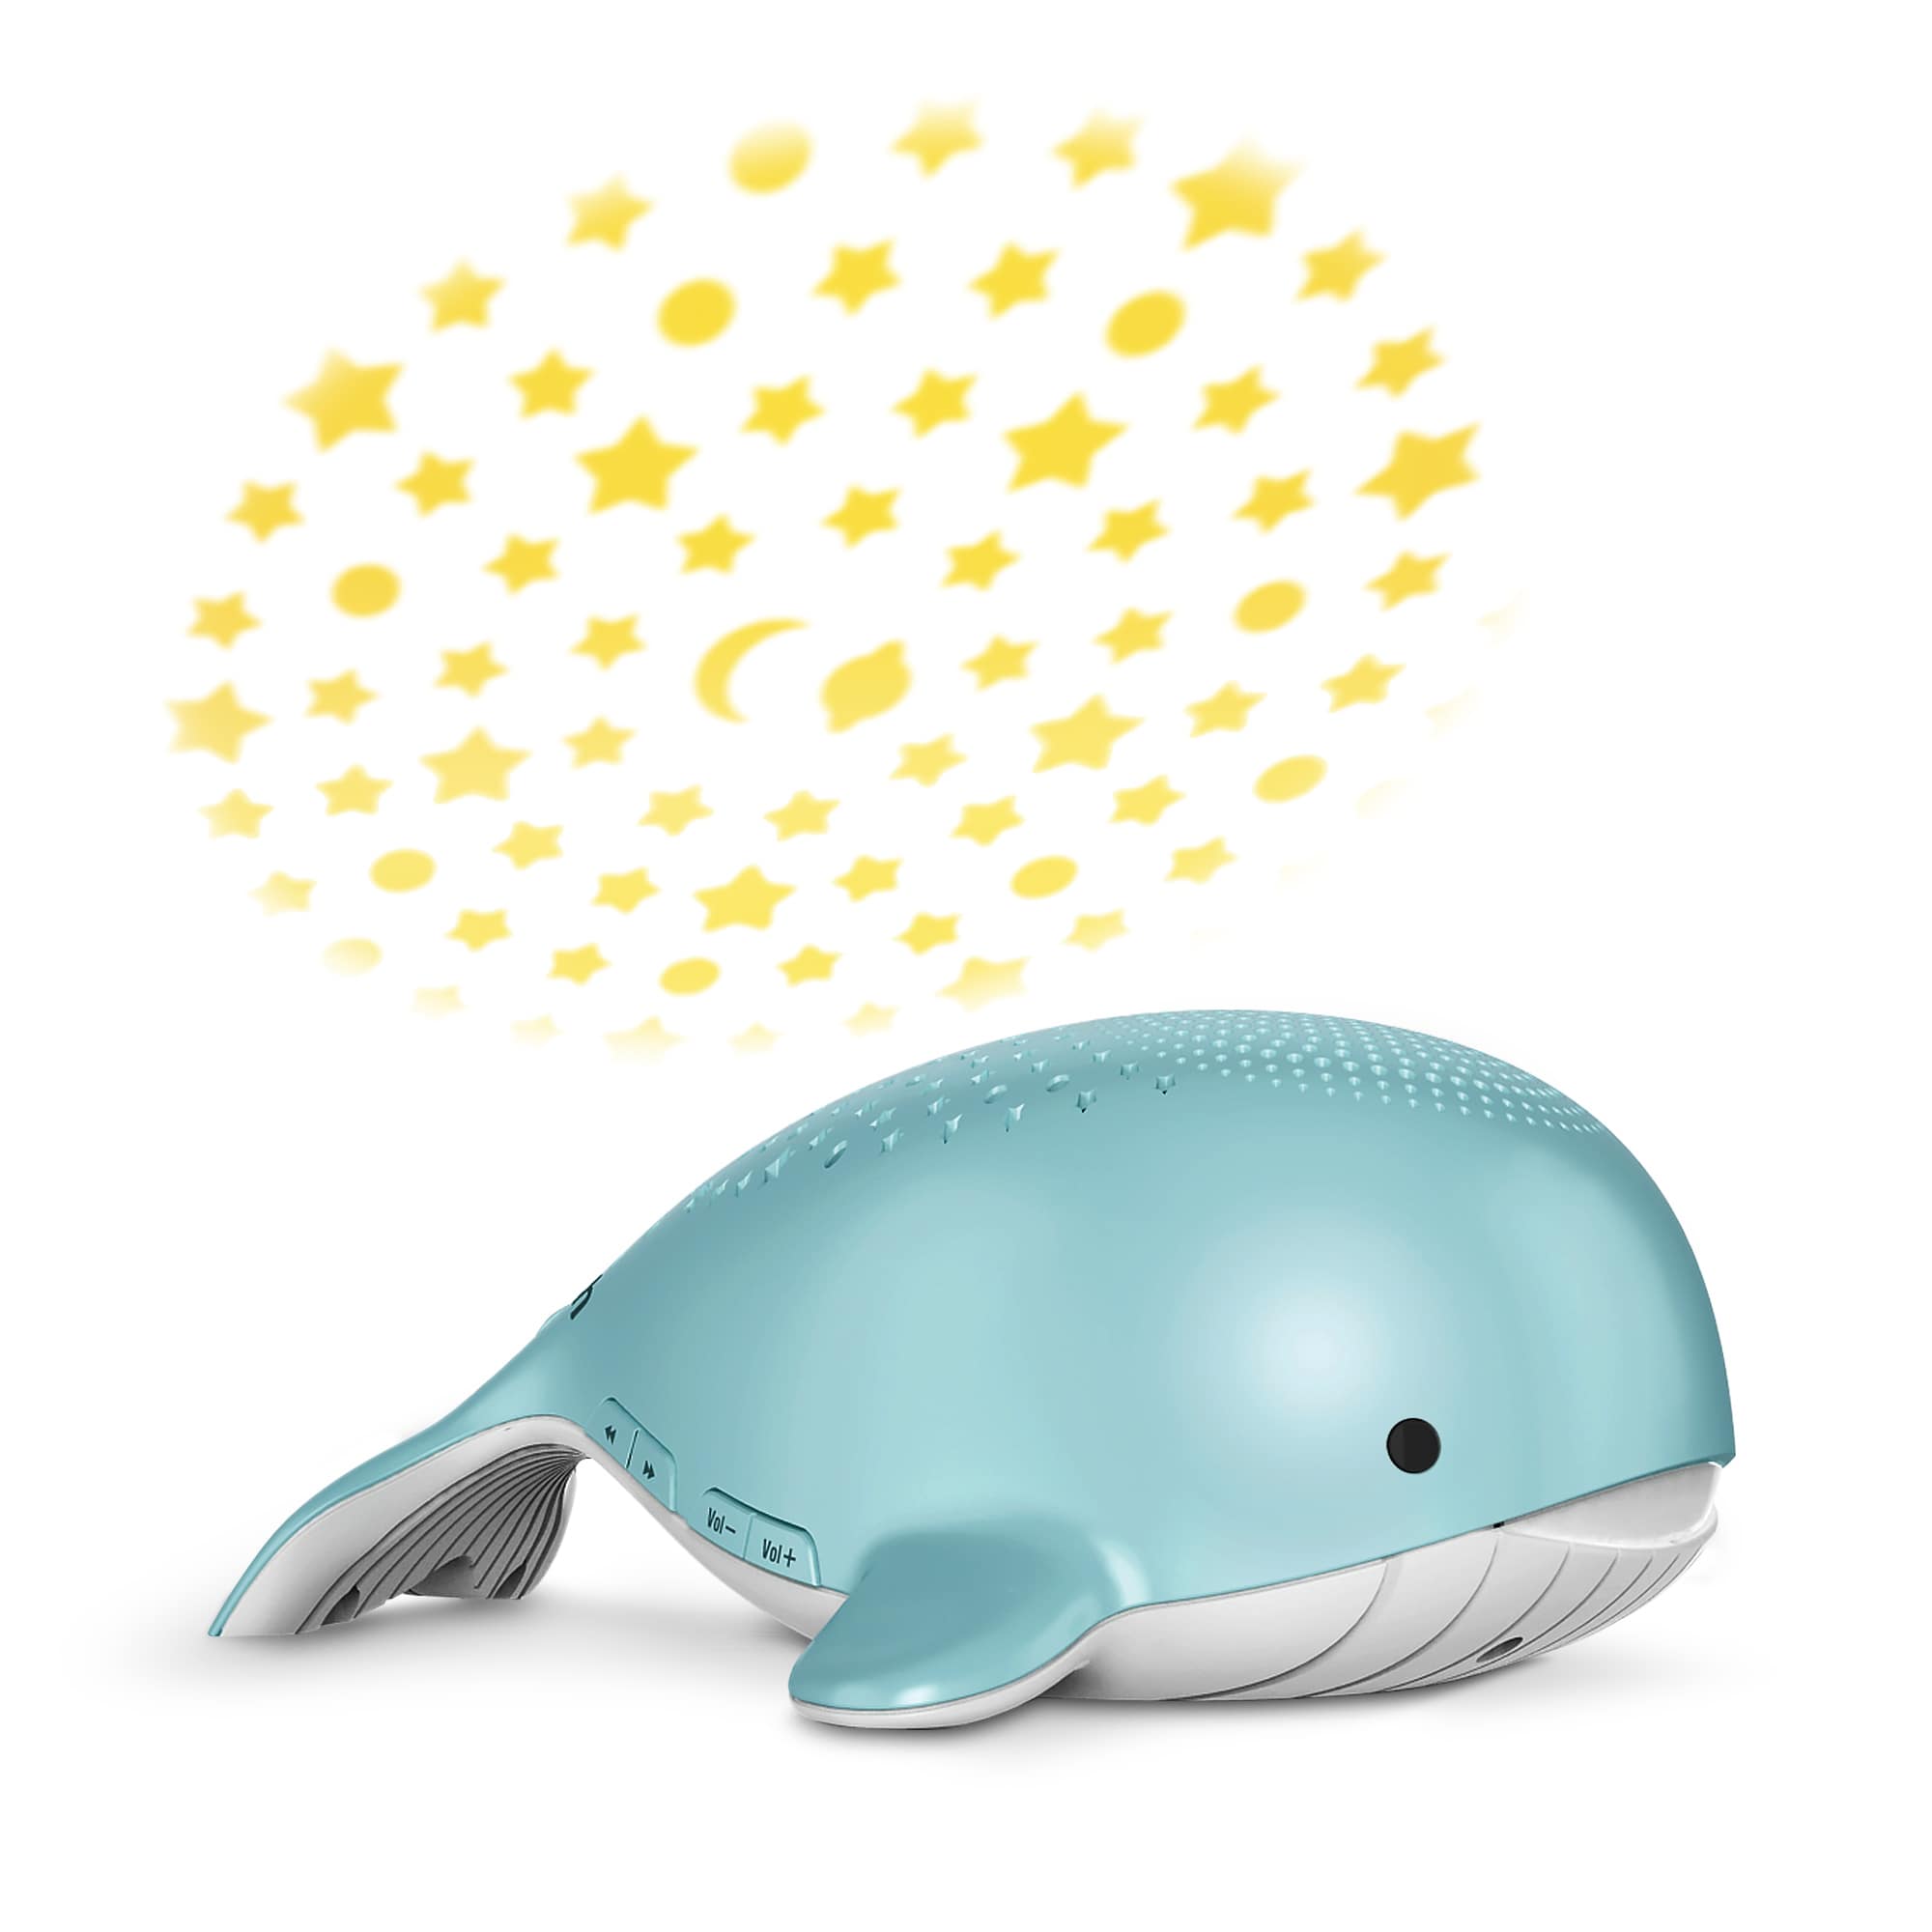 Wyatt the Whale&reg; Storytelling Soother - view 1